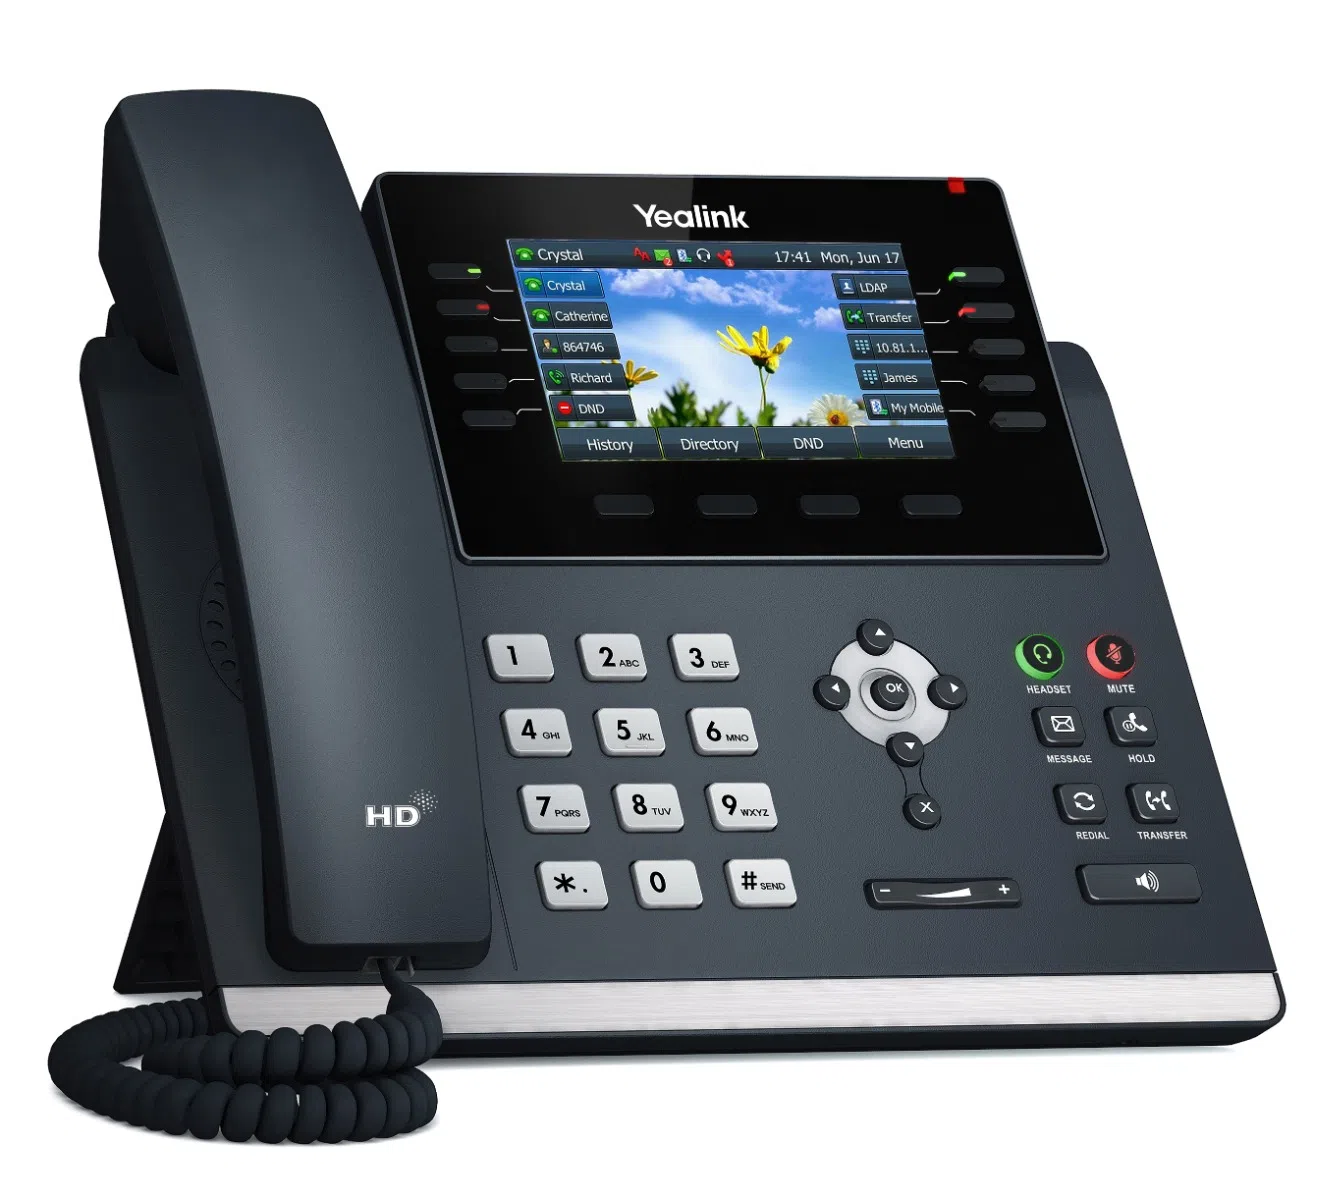 Can I use Bluetooth with the Yealink SIP-T46U IP phone?